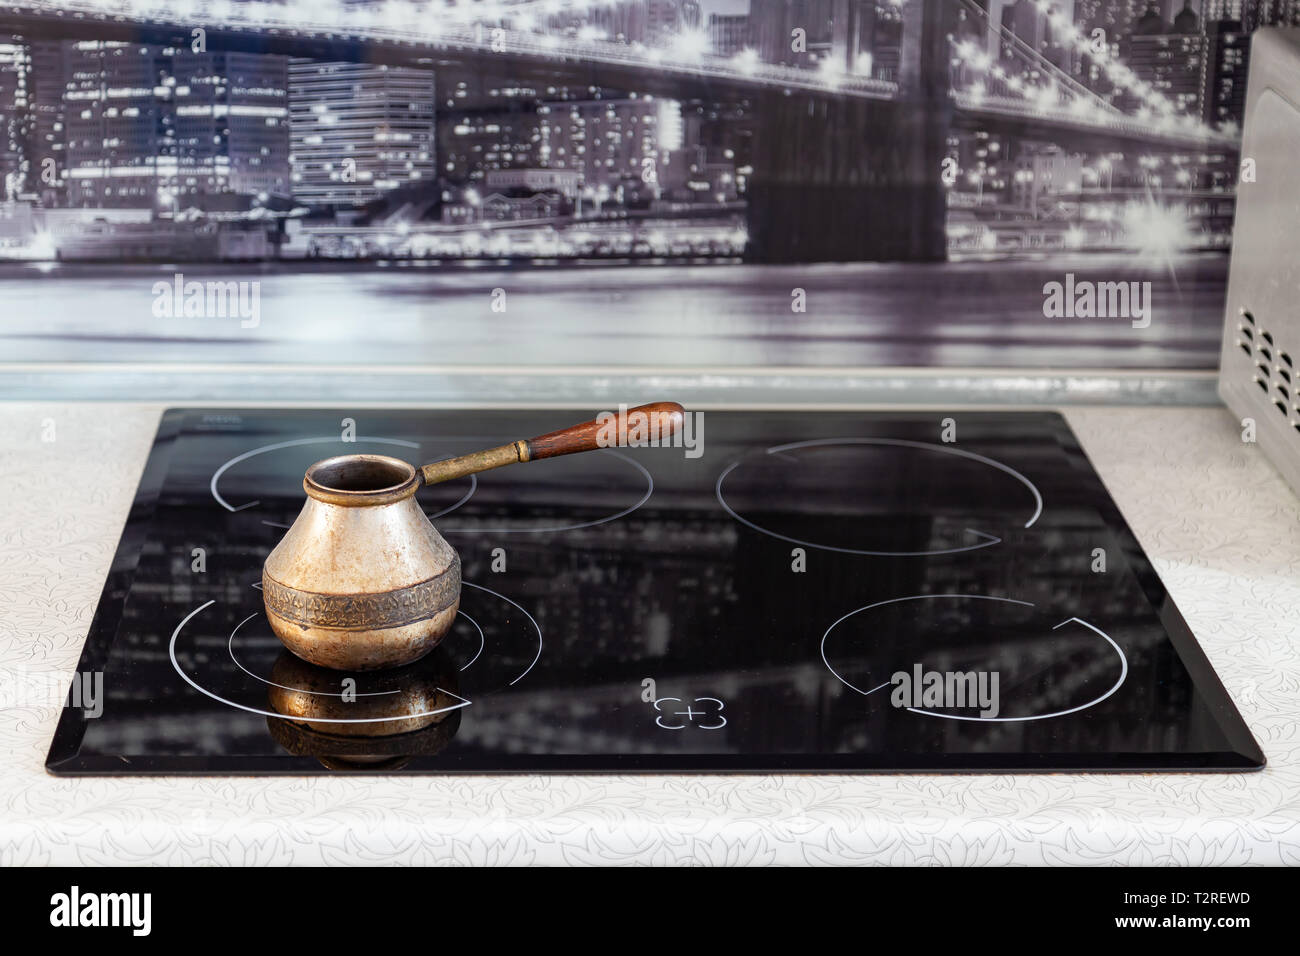 Old Bronze Turkish retro coffee maker kanaka on glass hob and stove with wooden handle, worn on a black background in an apartment in the kitchen. Ret Stock Photo